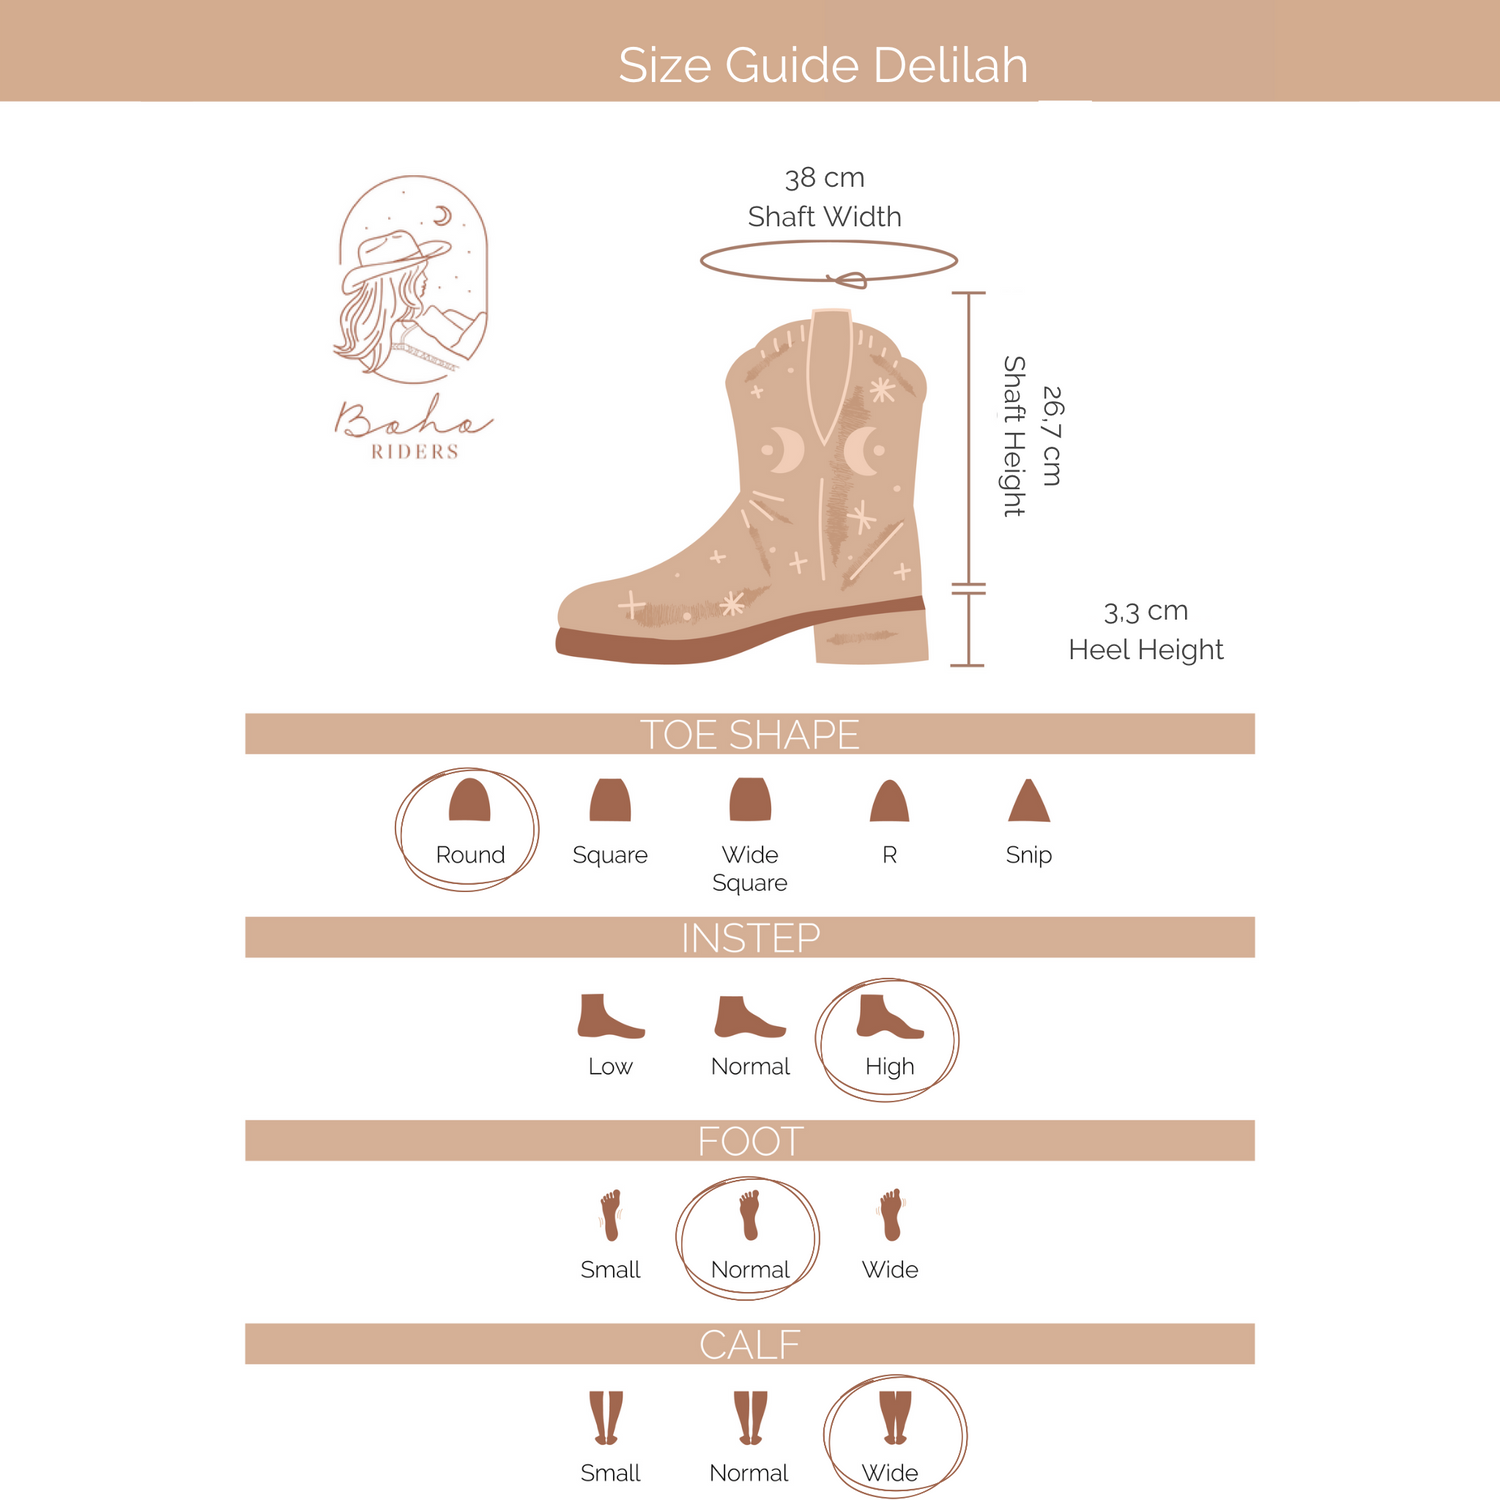 What you want to know about the fit ofAriat Delilah Round Toe - Riding Boot - Distressed Brown / Fudge